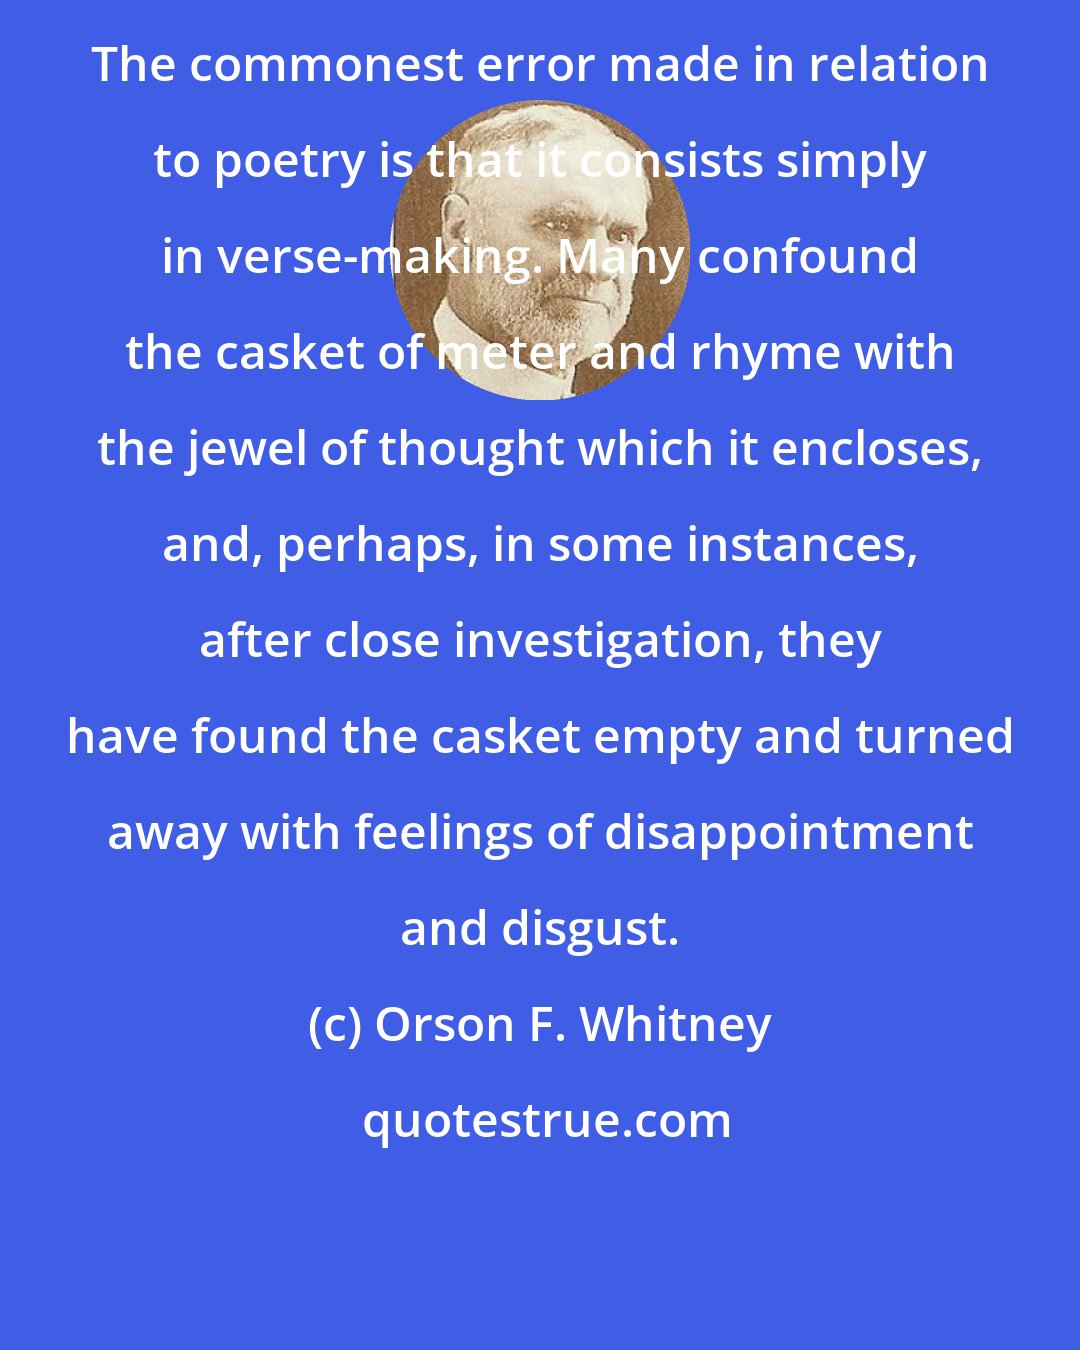 Orson F. Whitney: The commonest error made in relation to poetry is that it consists simply in verse-making. Many confound the casket of meter and rhyme with the jewel of thought which it encloses, and, perhaps, in some instances, after close investigation, they have found the casket empty and turned away with feelings of disappointment and disgust.